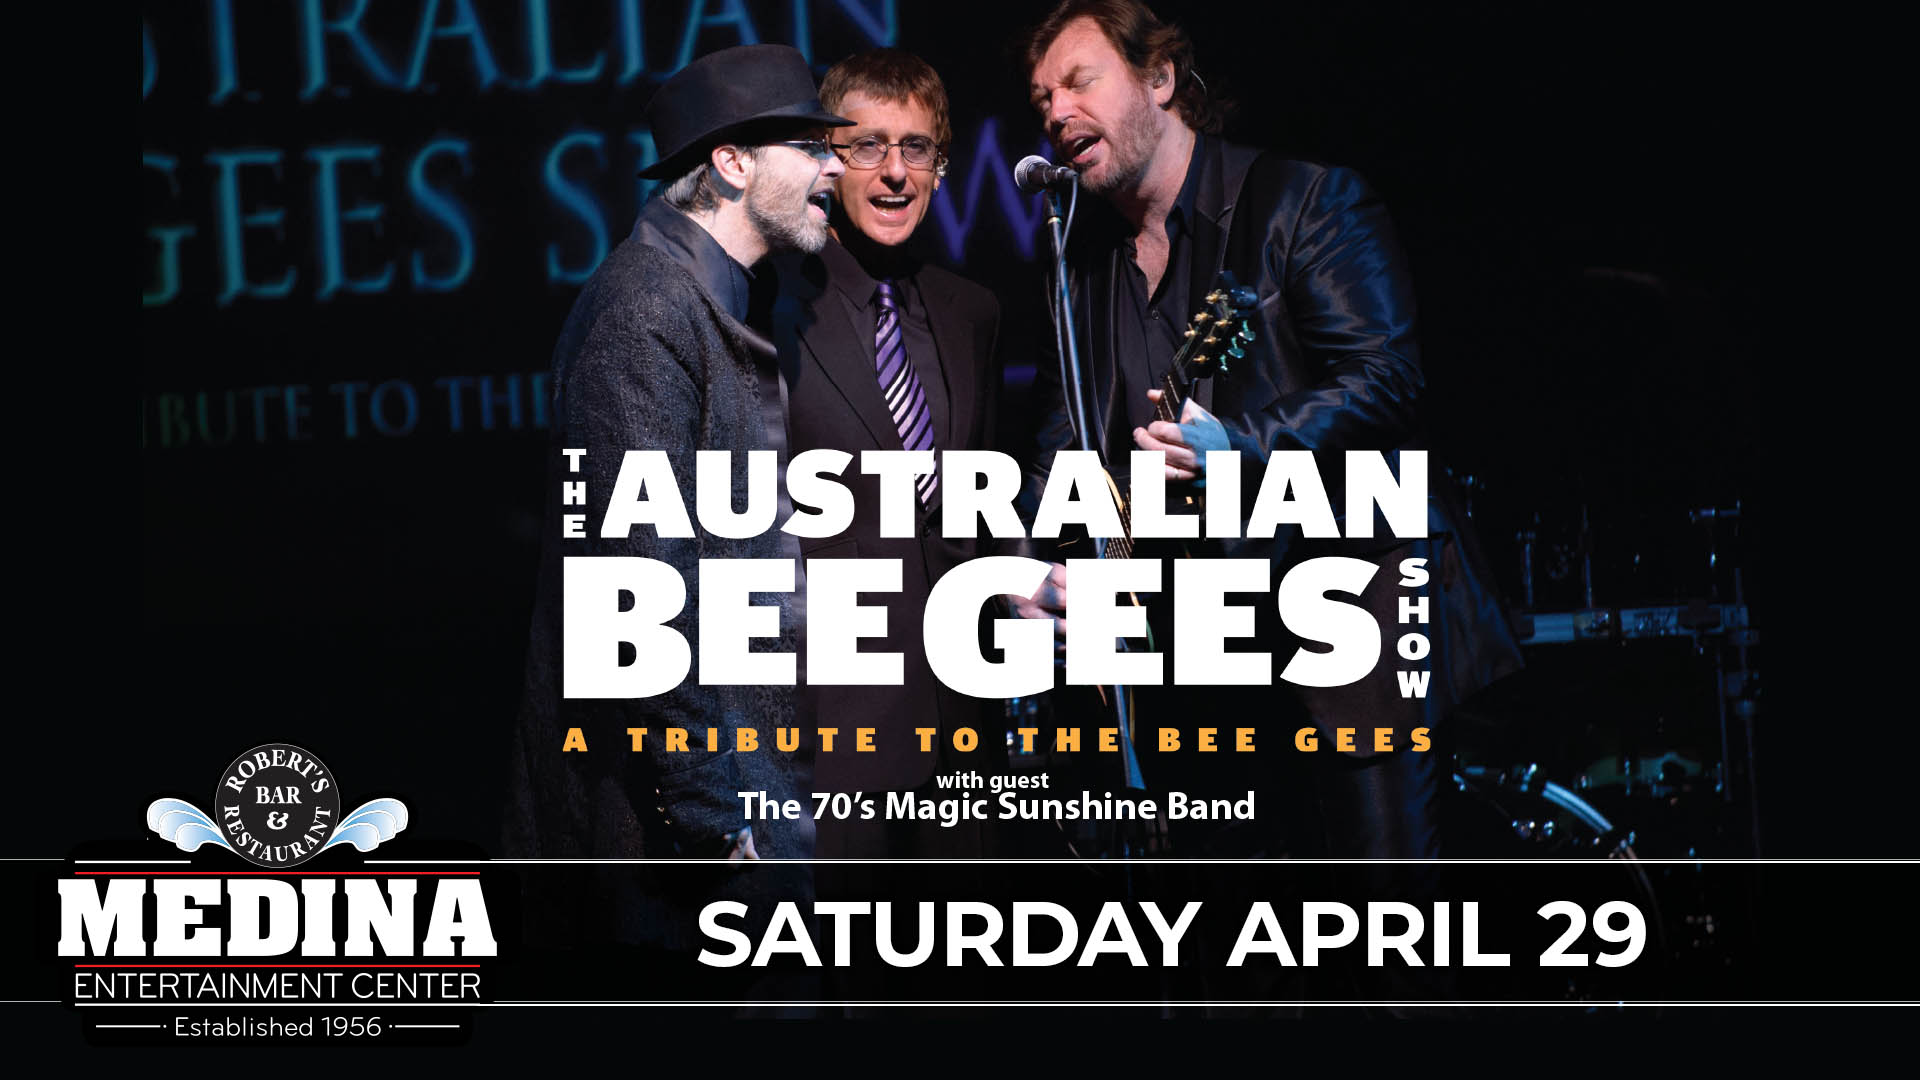 The Australian Bee Gees Show ~ A Tribute To The Bee Gees ~ with guest The 70’s Magic Sunshine Band Medina Entertainment Center Saturday, April 29th, 2023 Doors: 6:30PM | Music: 7:30PM | 21+ Tickets on-sale Friday, March 10th at 11AM General Seating $28/ Silver Reserved $33 / Gold Reserved $38 plus applicable fees